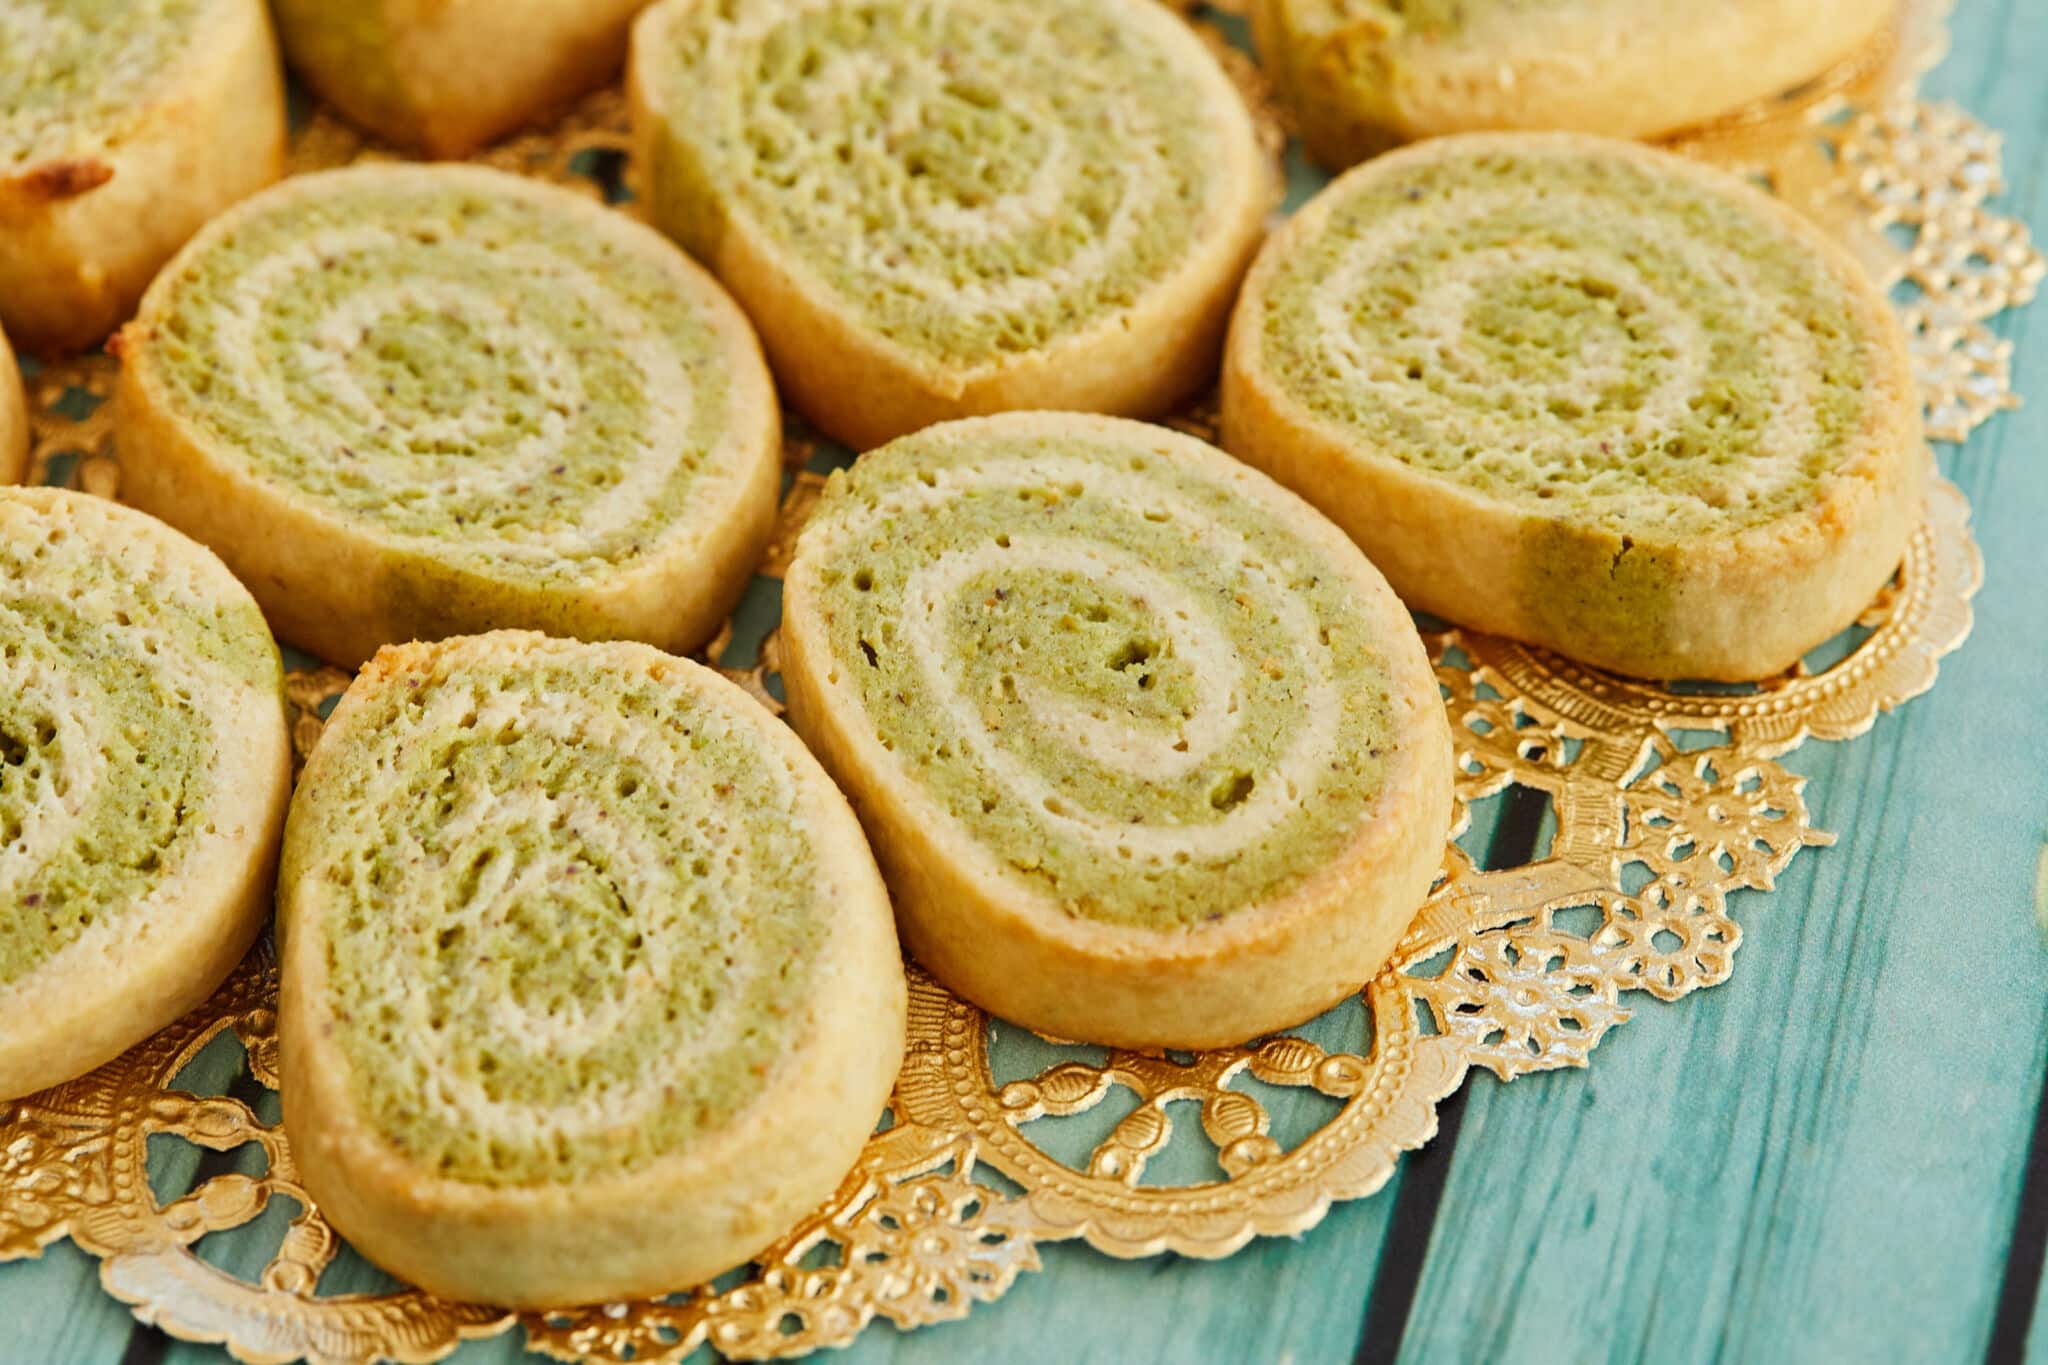 A plate of colorful kaju pista rolls on a gold doily laid out on a wooden table.